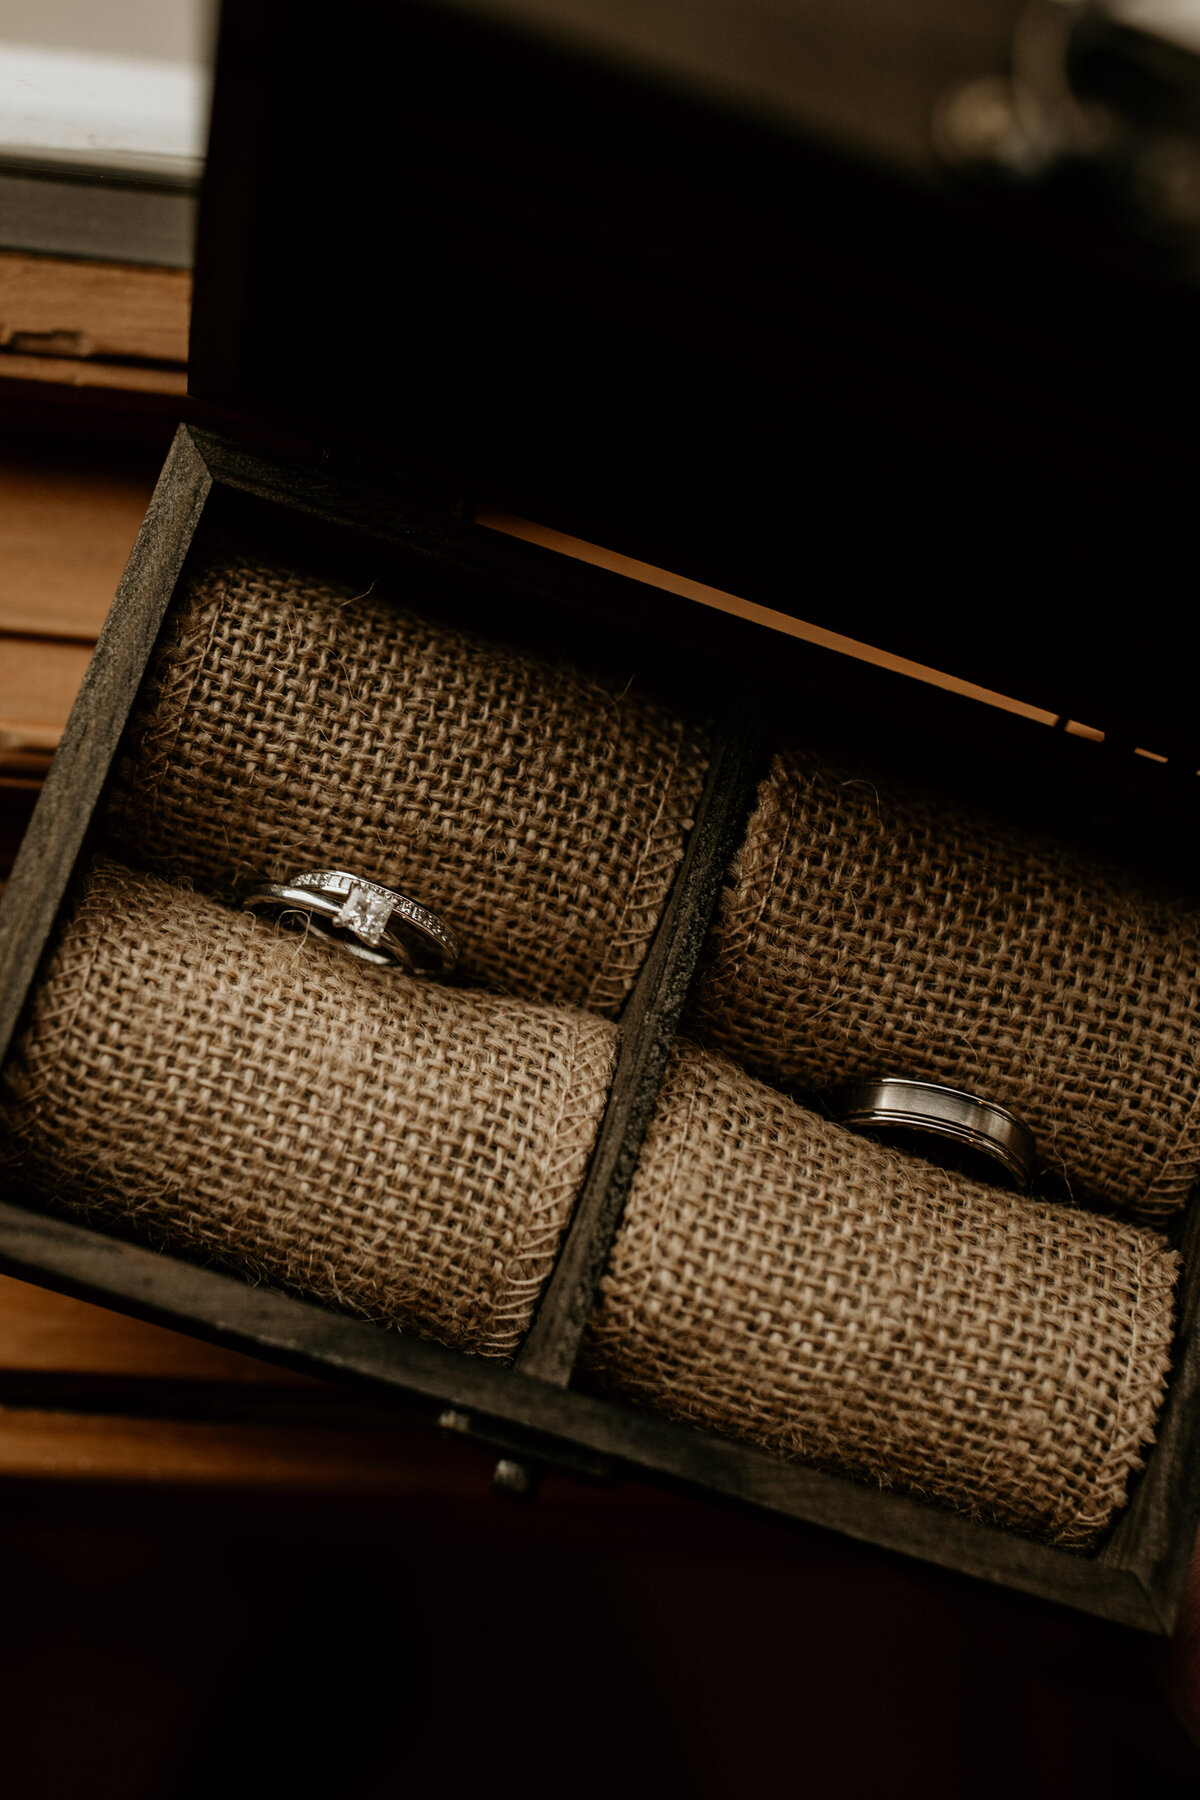 wedding rings sitting in a wooden box